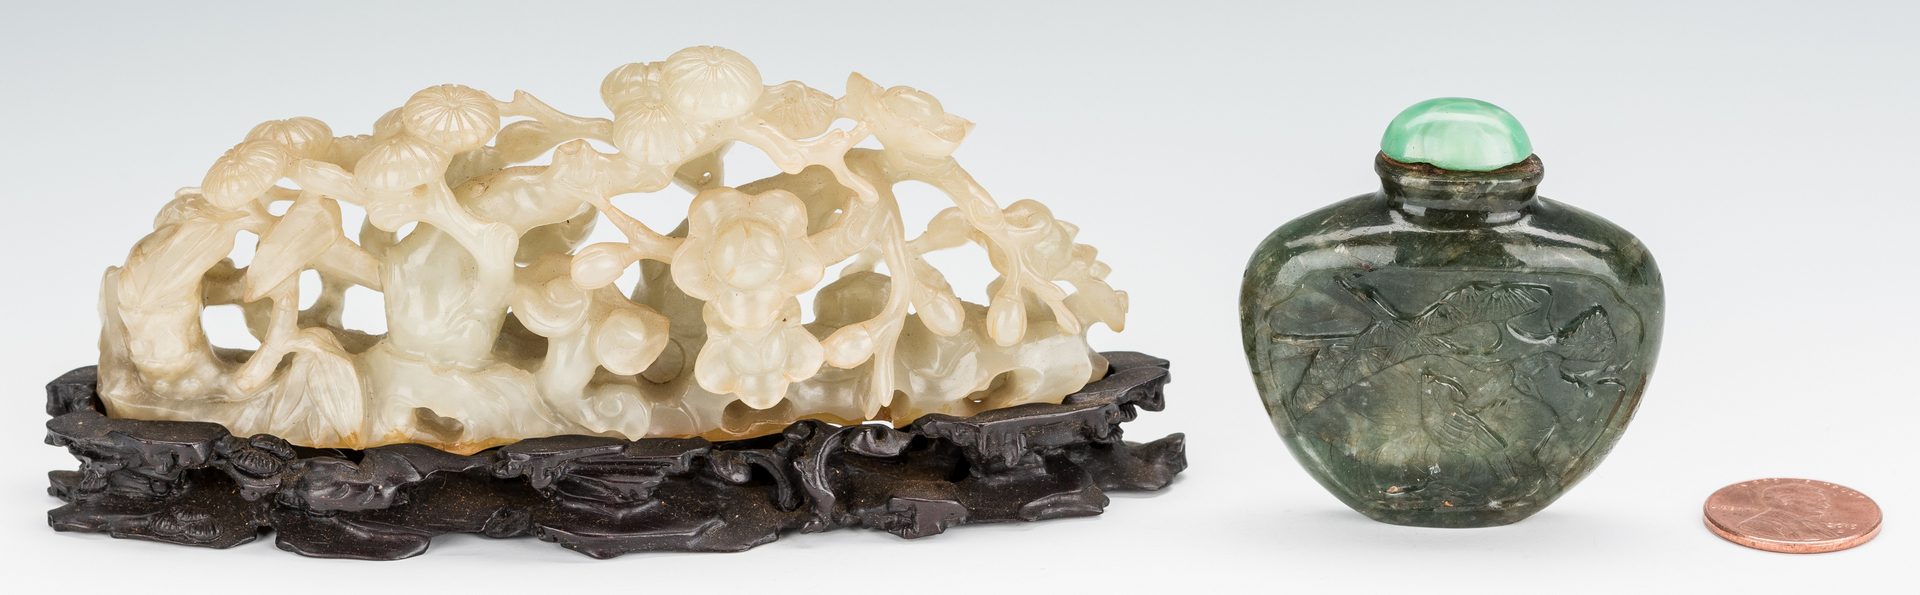 Lot 12: Chinese Carved Jade Boulder and Snuff Bottle